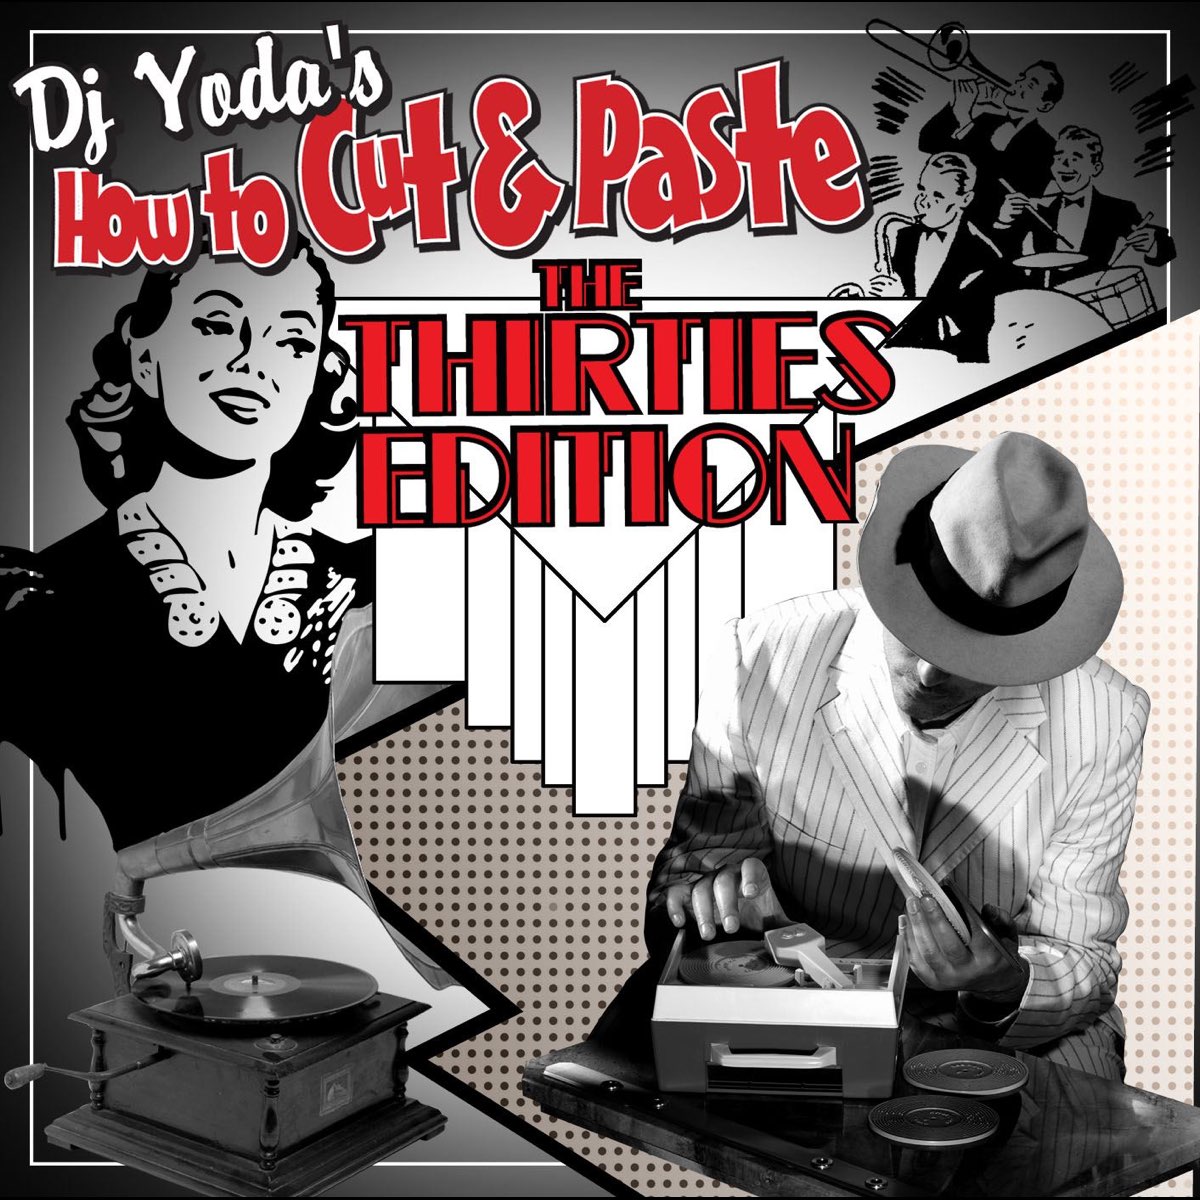 ‎dj Yodas How To Cut And Paste The Thirties Edition Album By Dj